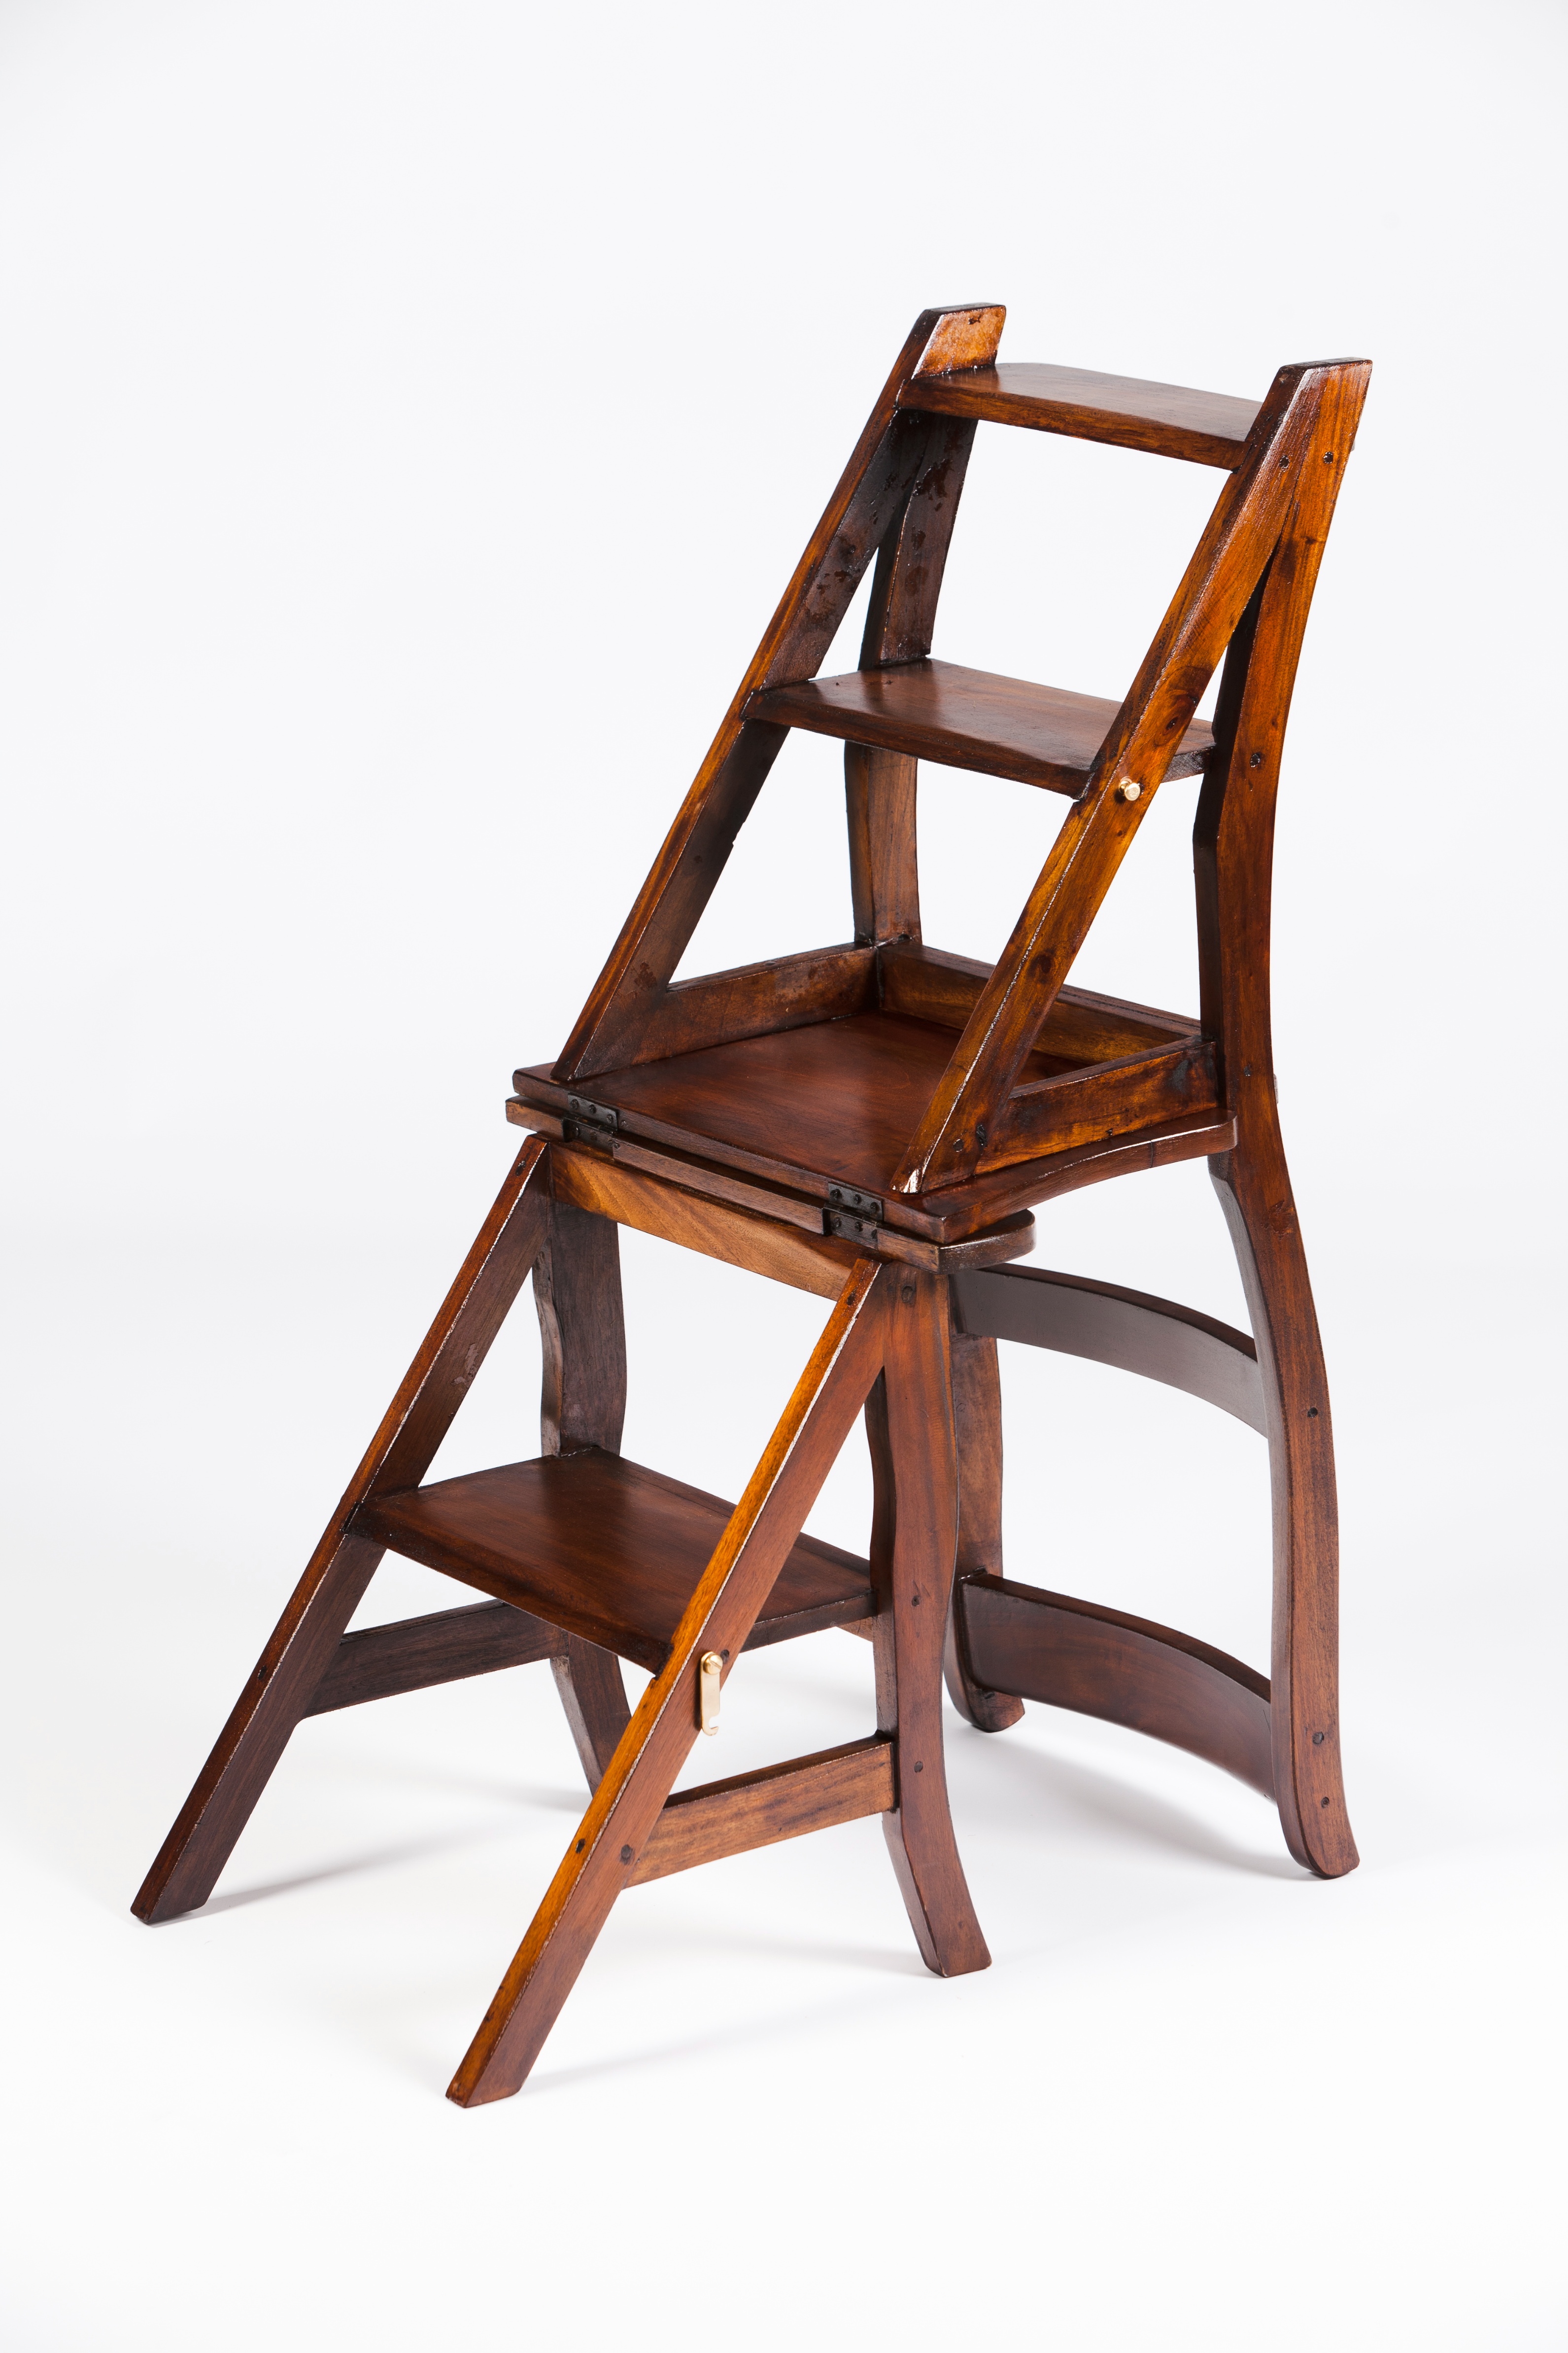 A library chair / step ladderOak 20th century90x44x45 cm - Image 2 of 2